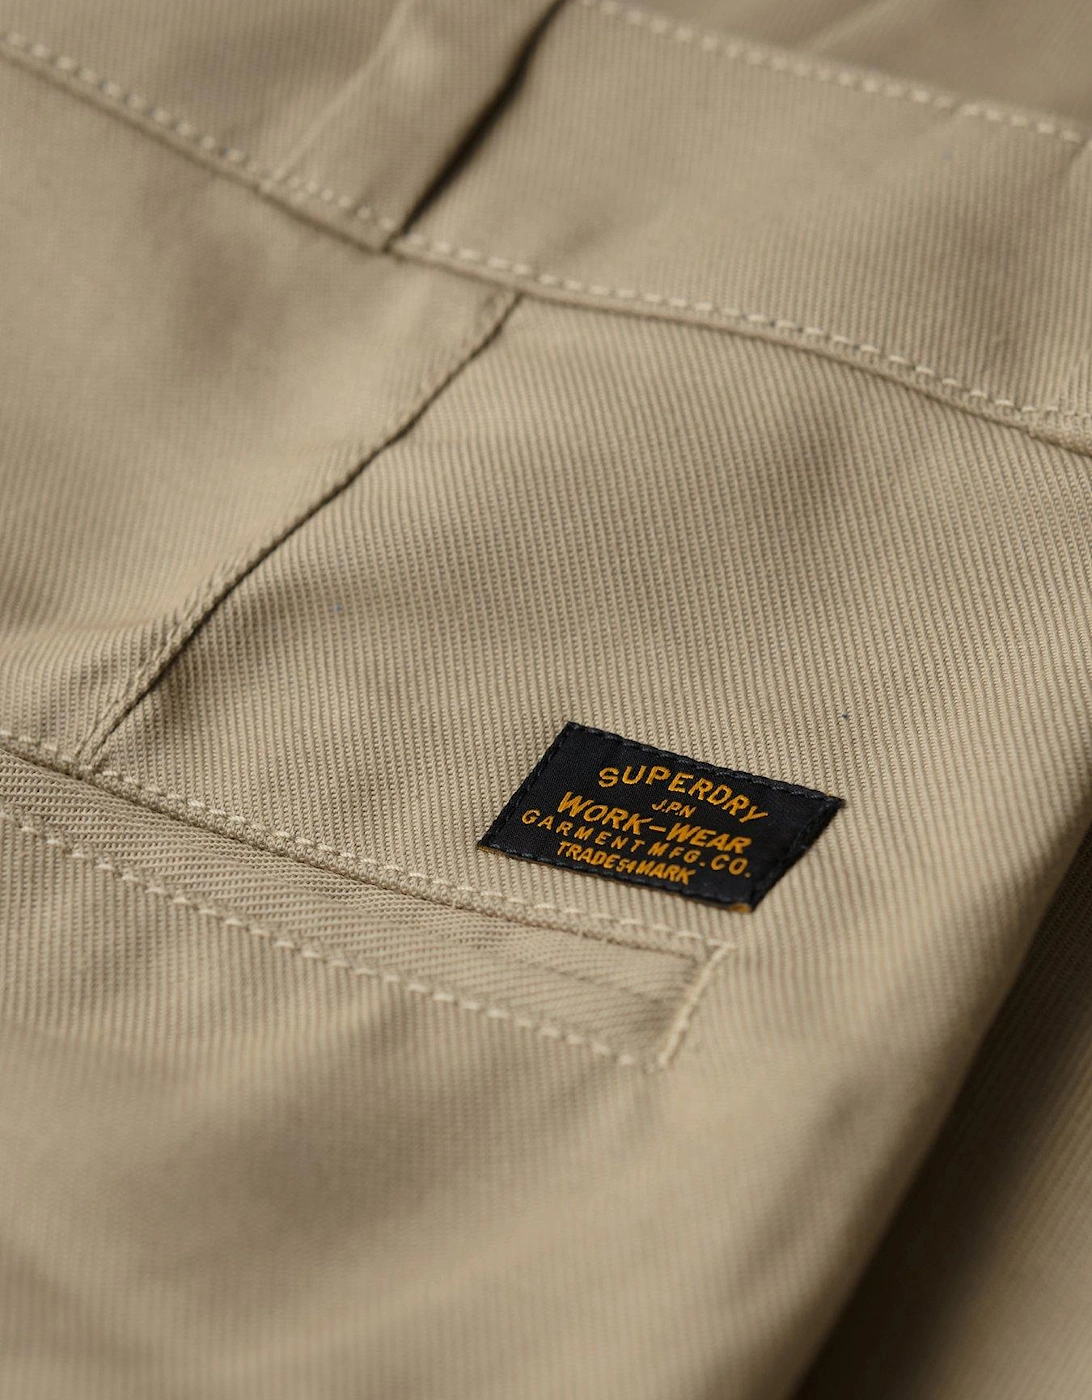 Straight Fit Chino Trousers - Beige